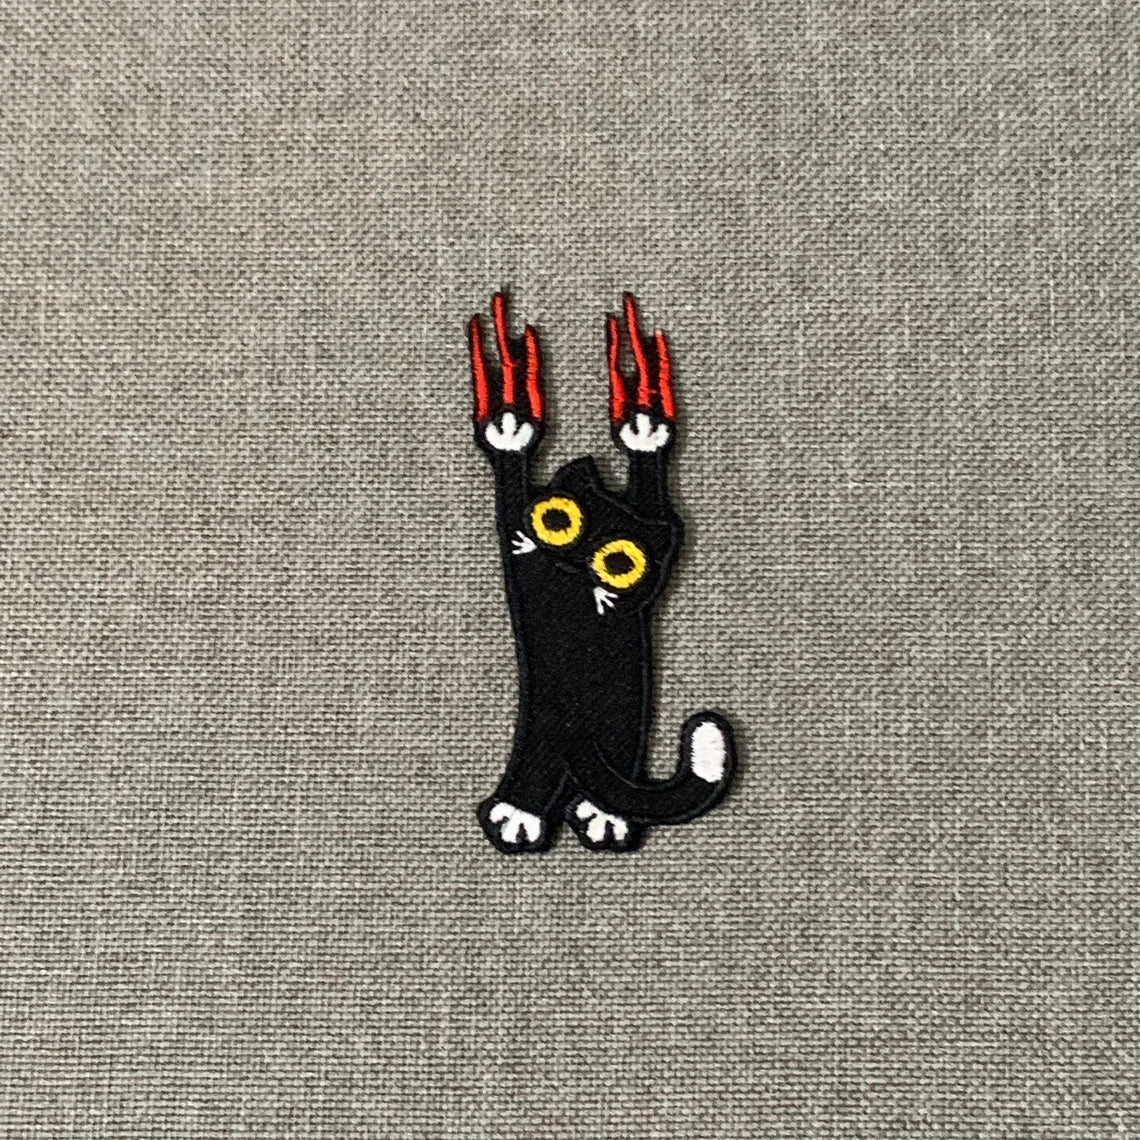 Black cat Patches iron on patches Cat iron on patch patches for Jackets embroidery patch Patch for backpack